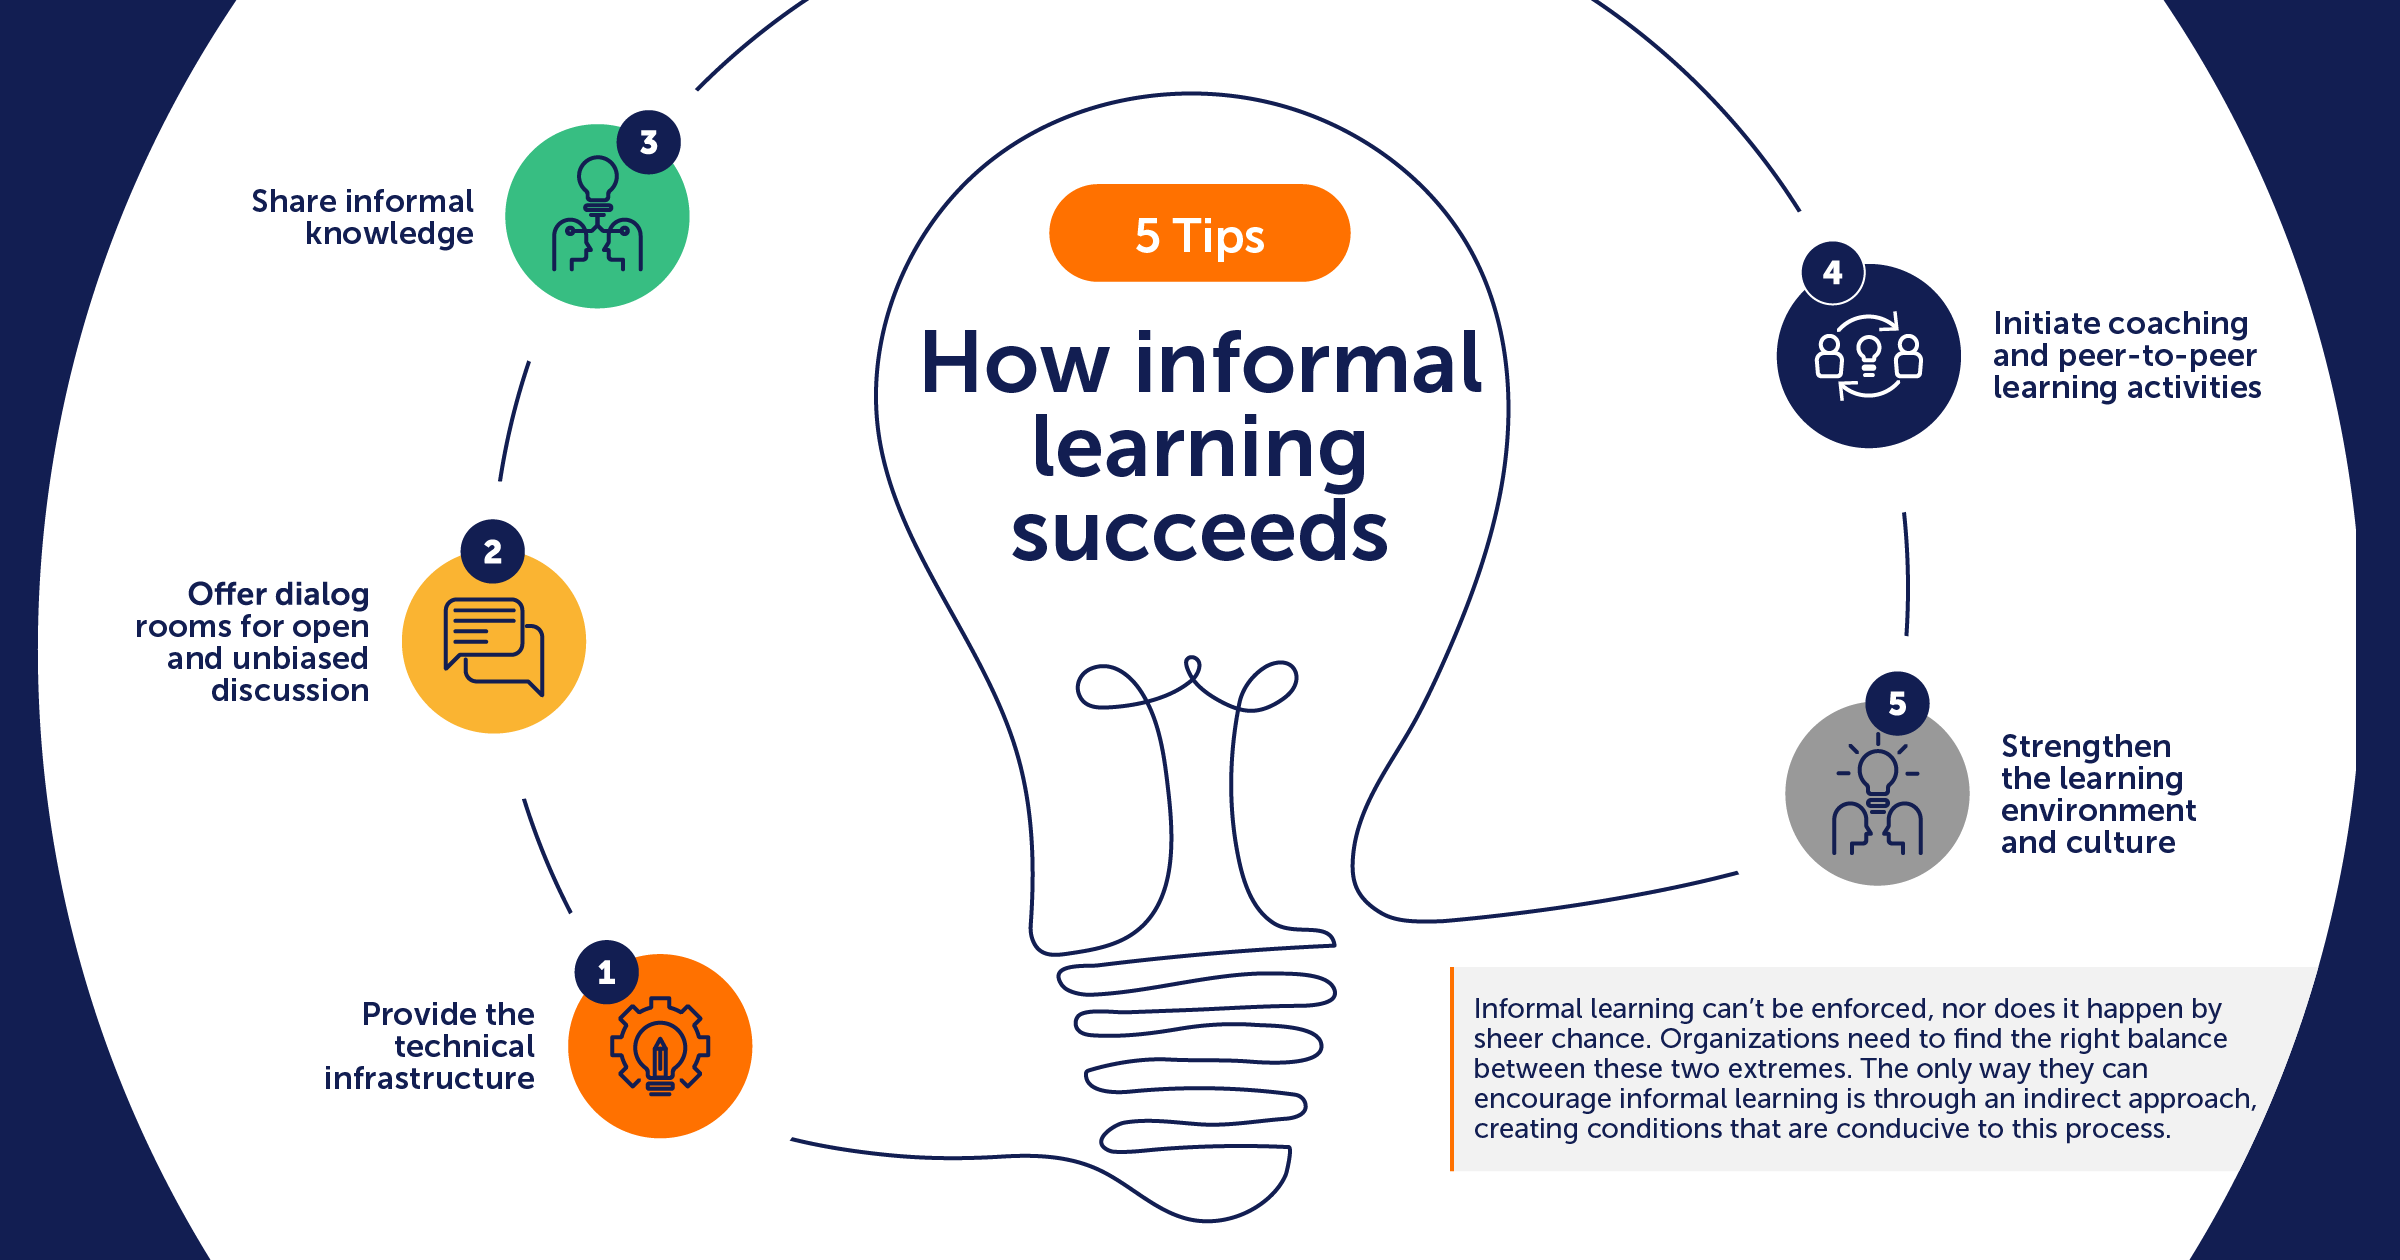 Informal learning is essential, but hard to manage. Our Five Tips help make informal learning happen.